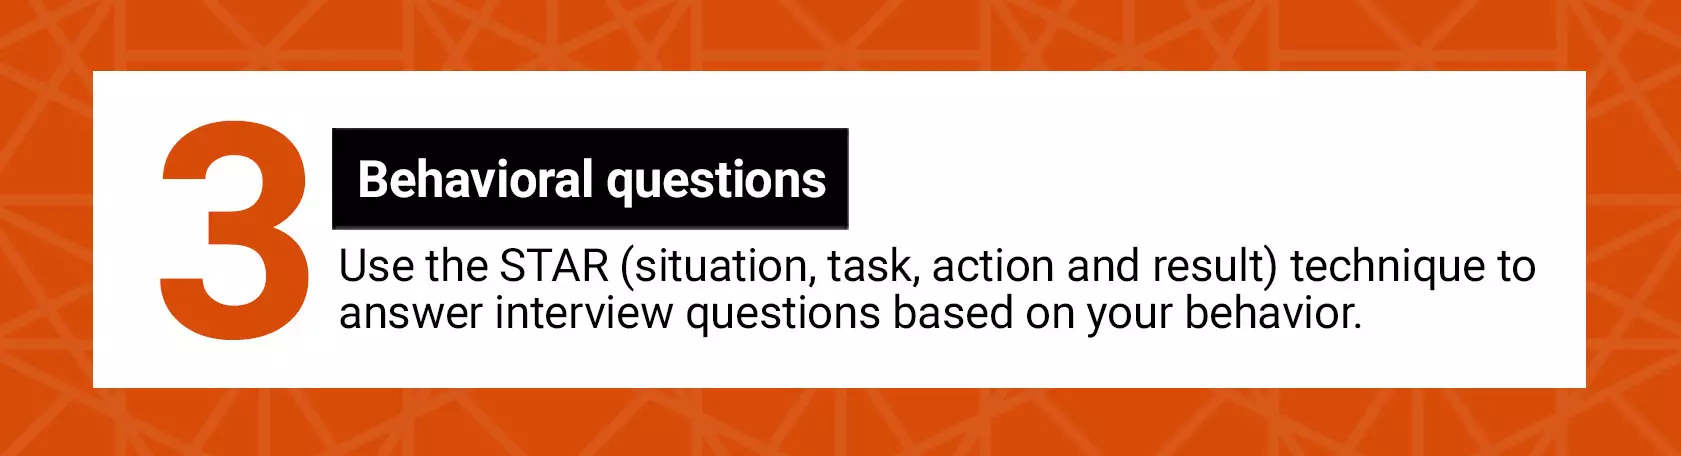 Behavioral questions. Use the STAR (situation, task, action and result) technique to answer interview questions based on your behavior.